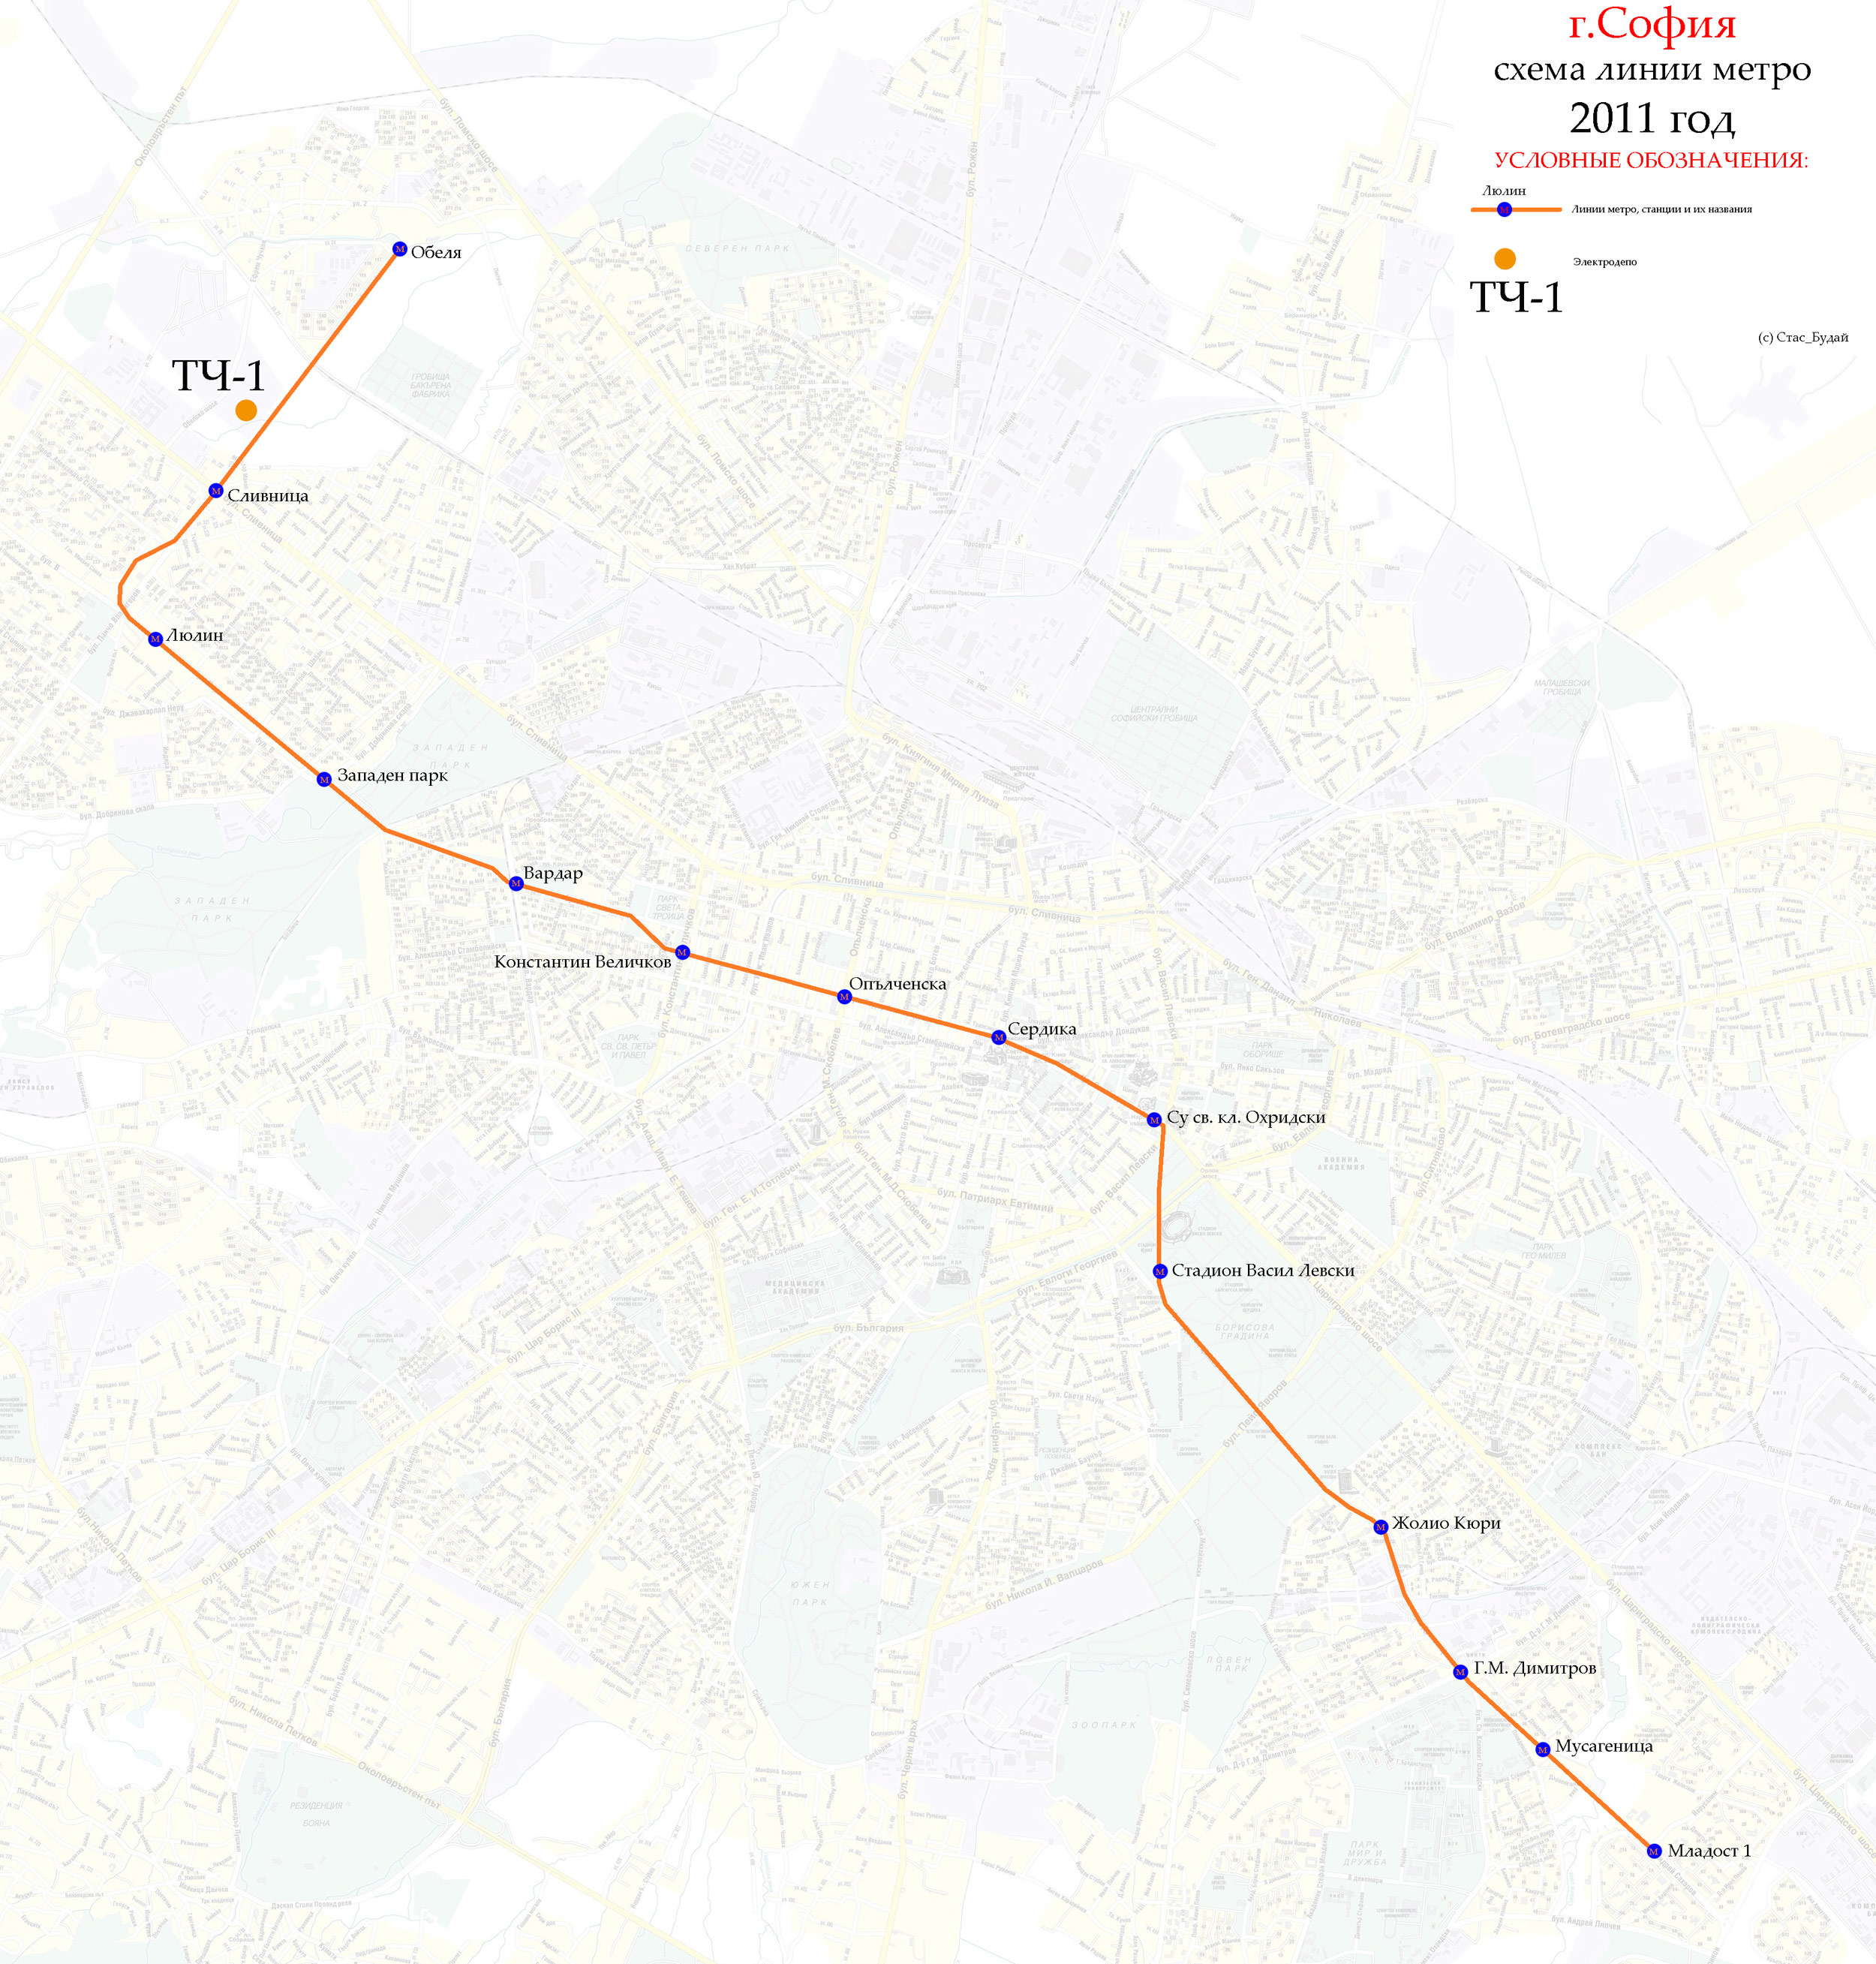 Sofia — Maps and diagrams of individual routes in the subway